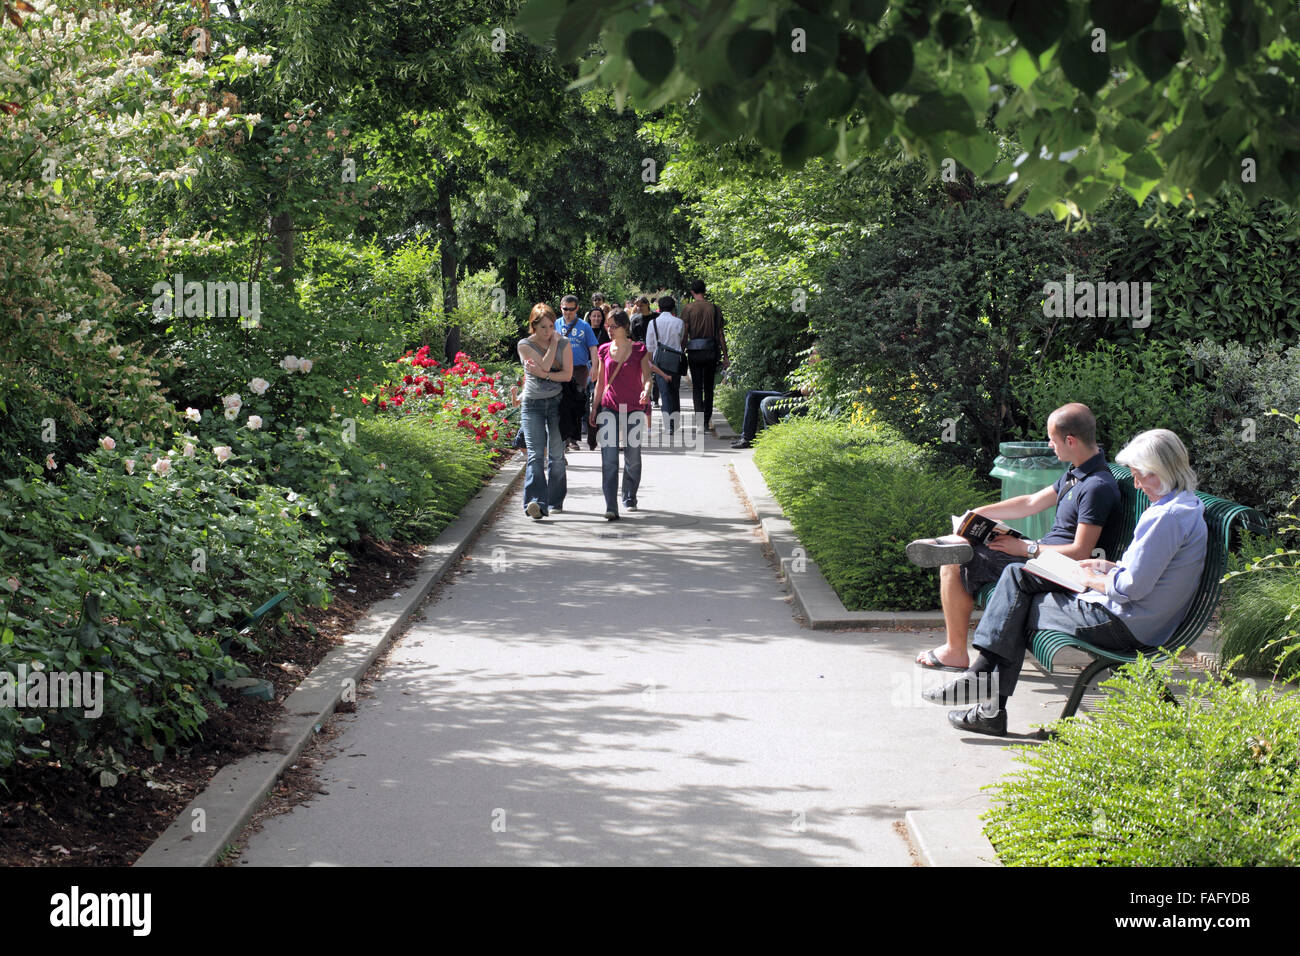 Part of the Promenade Plantee in Paris - a disused railway line converted into a landscaped walkway. Stock Photo